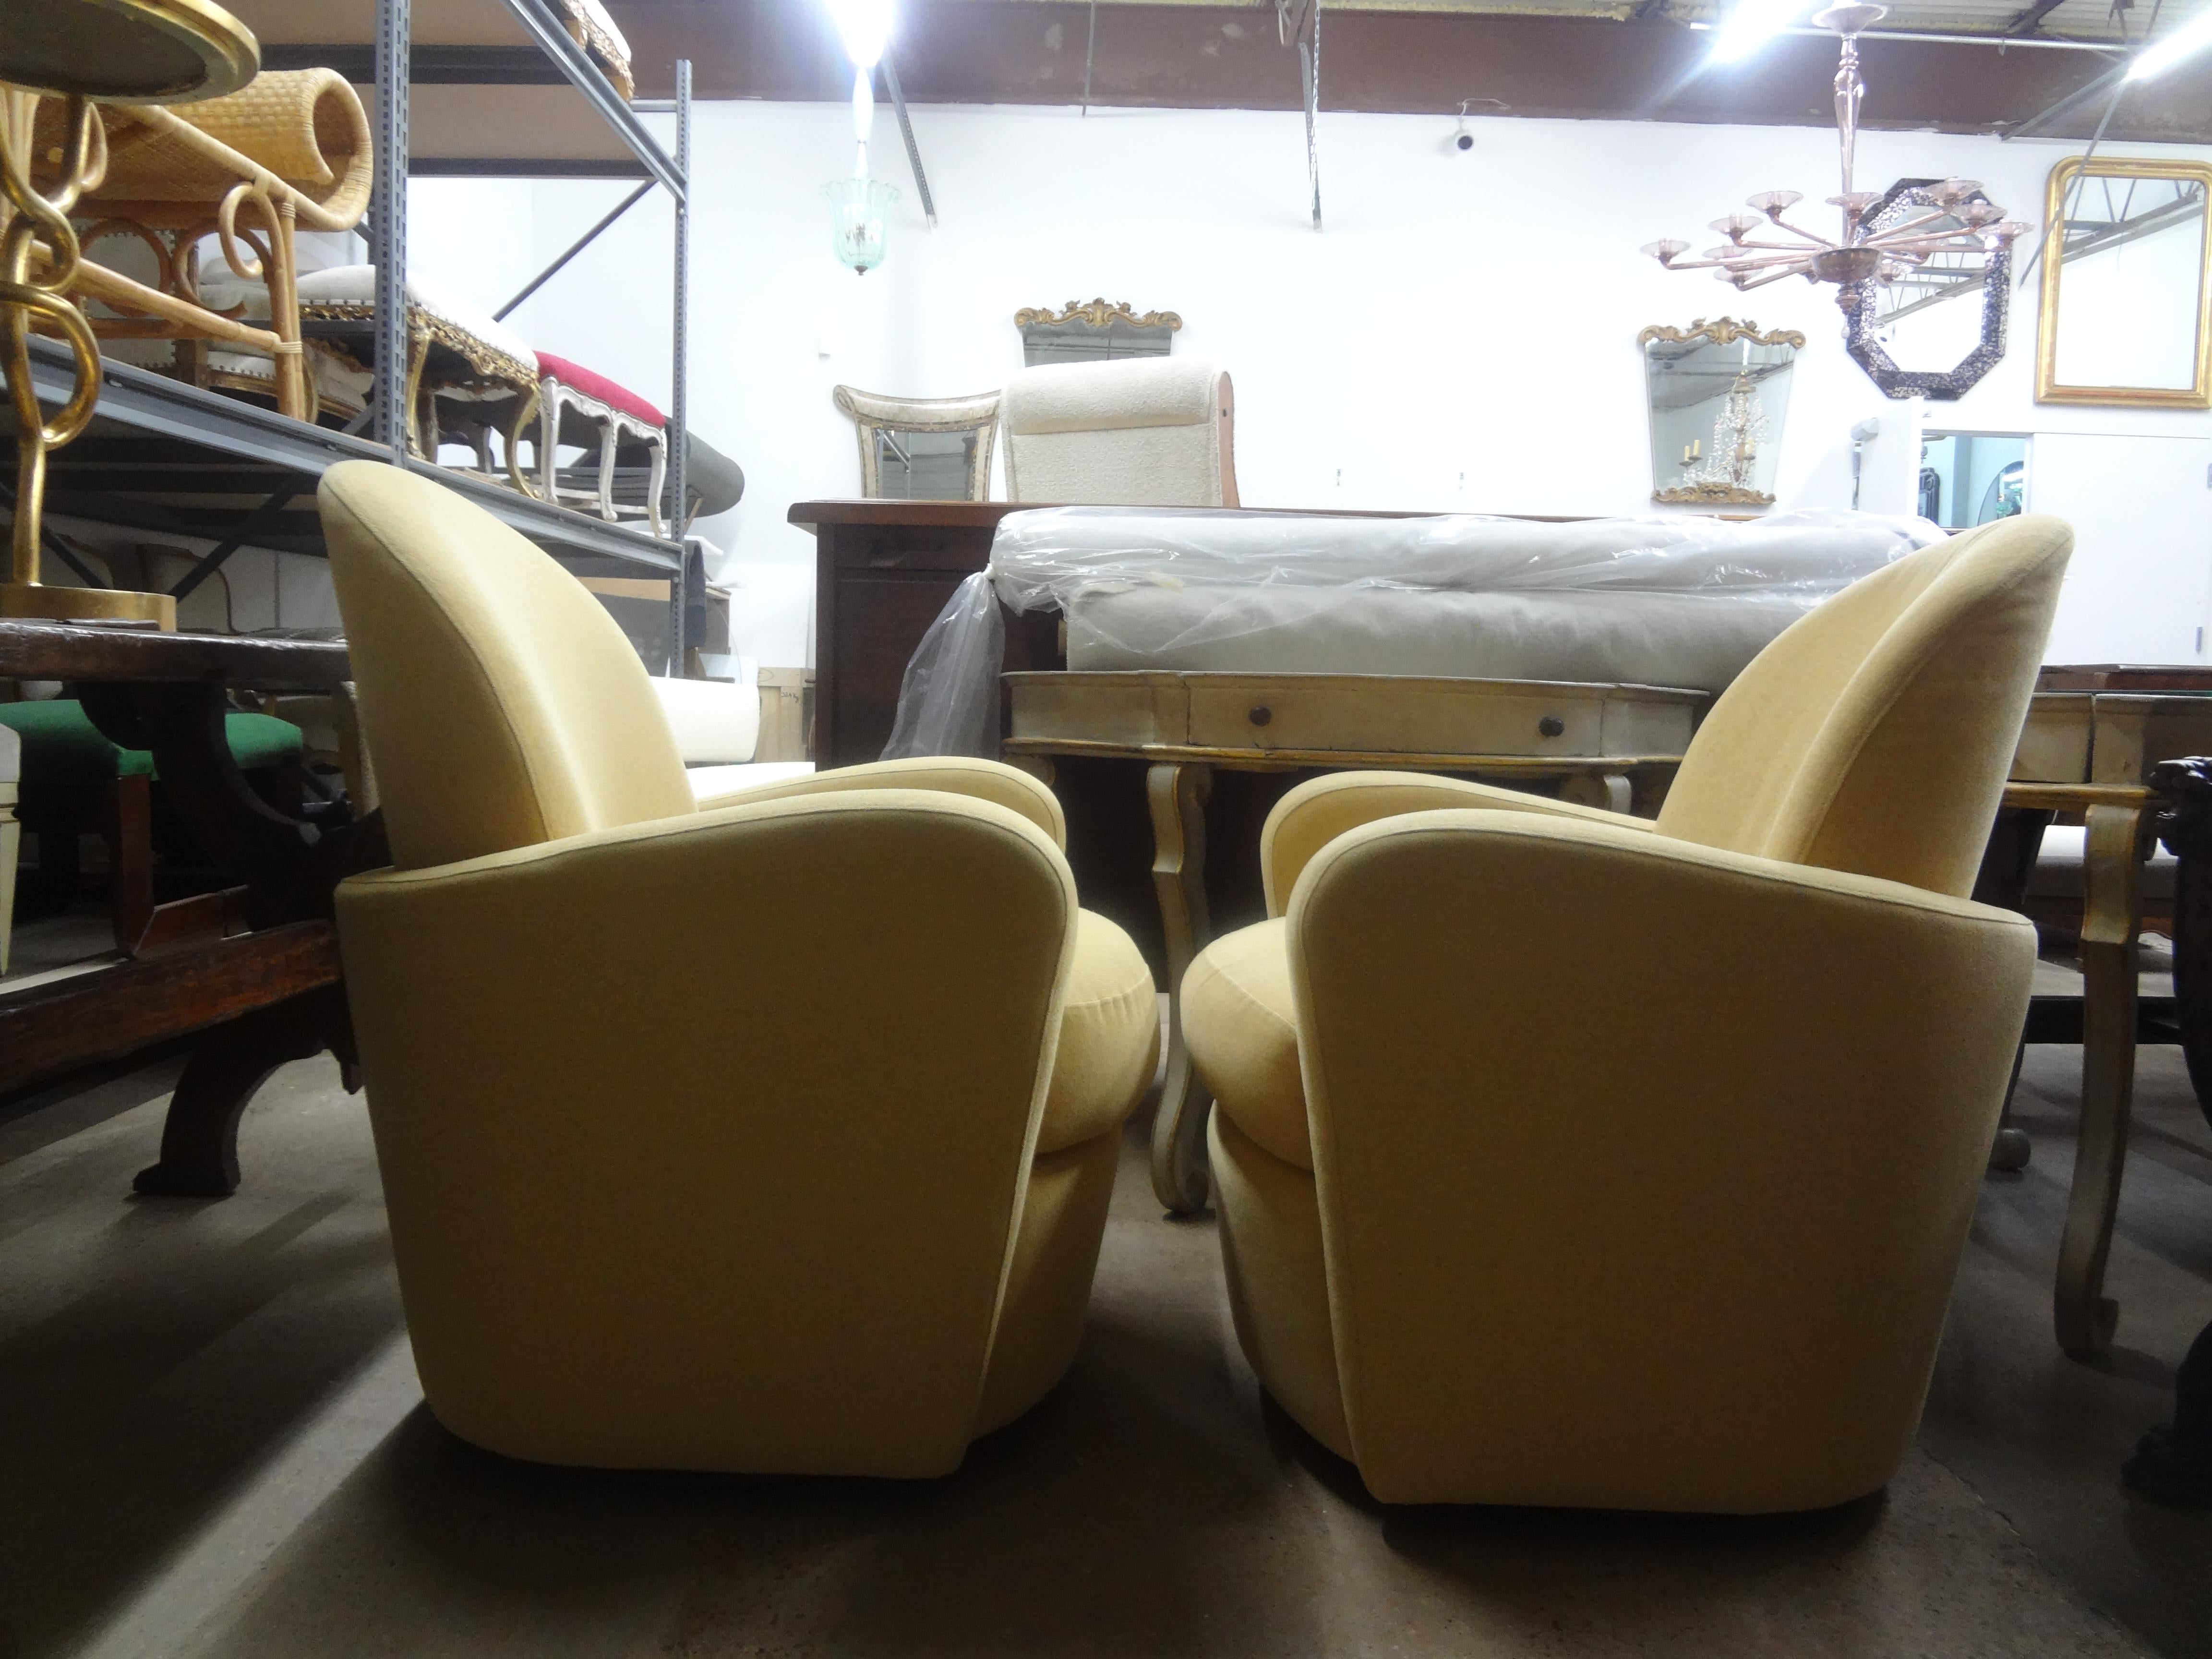 Pair Of Michael Wolk Style Swivel Chairs. This stunning pair of swivel chairs, lounge chairs, club chairs, or tub chairs inspired by the Michael Wolk Miami design are most comfortable and in very good vintage condition.
This pair retains the